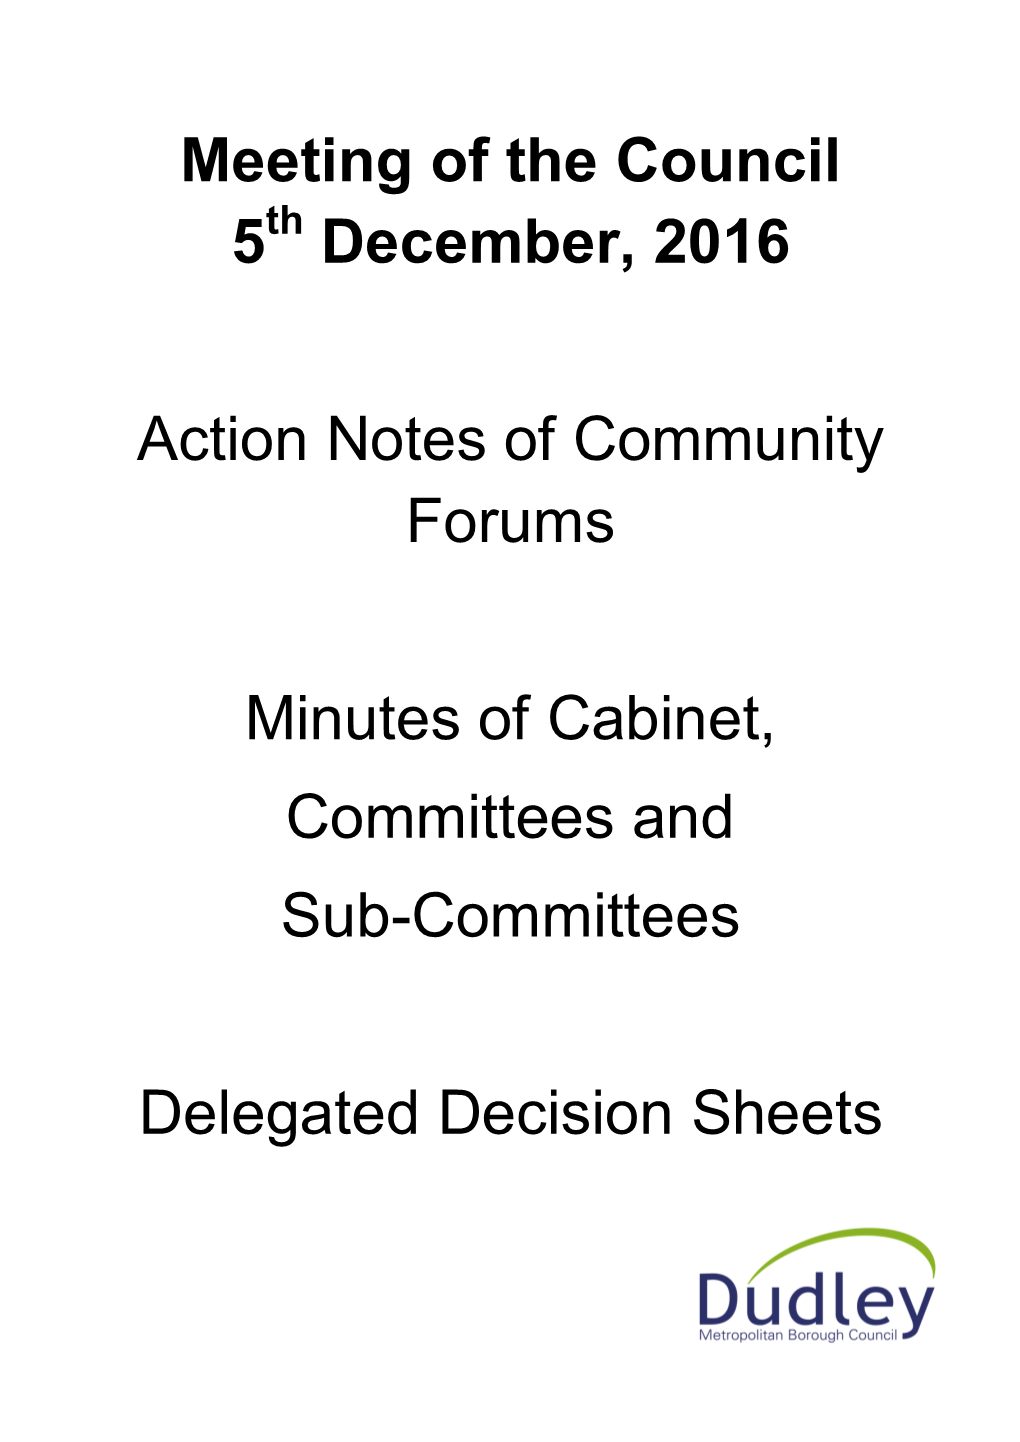 Meeting of the Council 5 December, 2016 Action Notes of Community